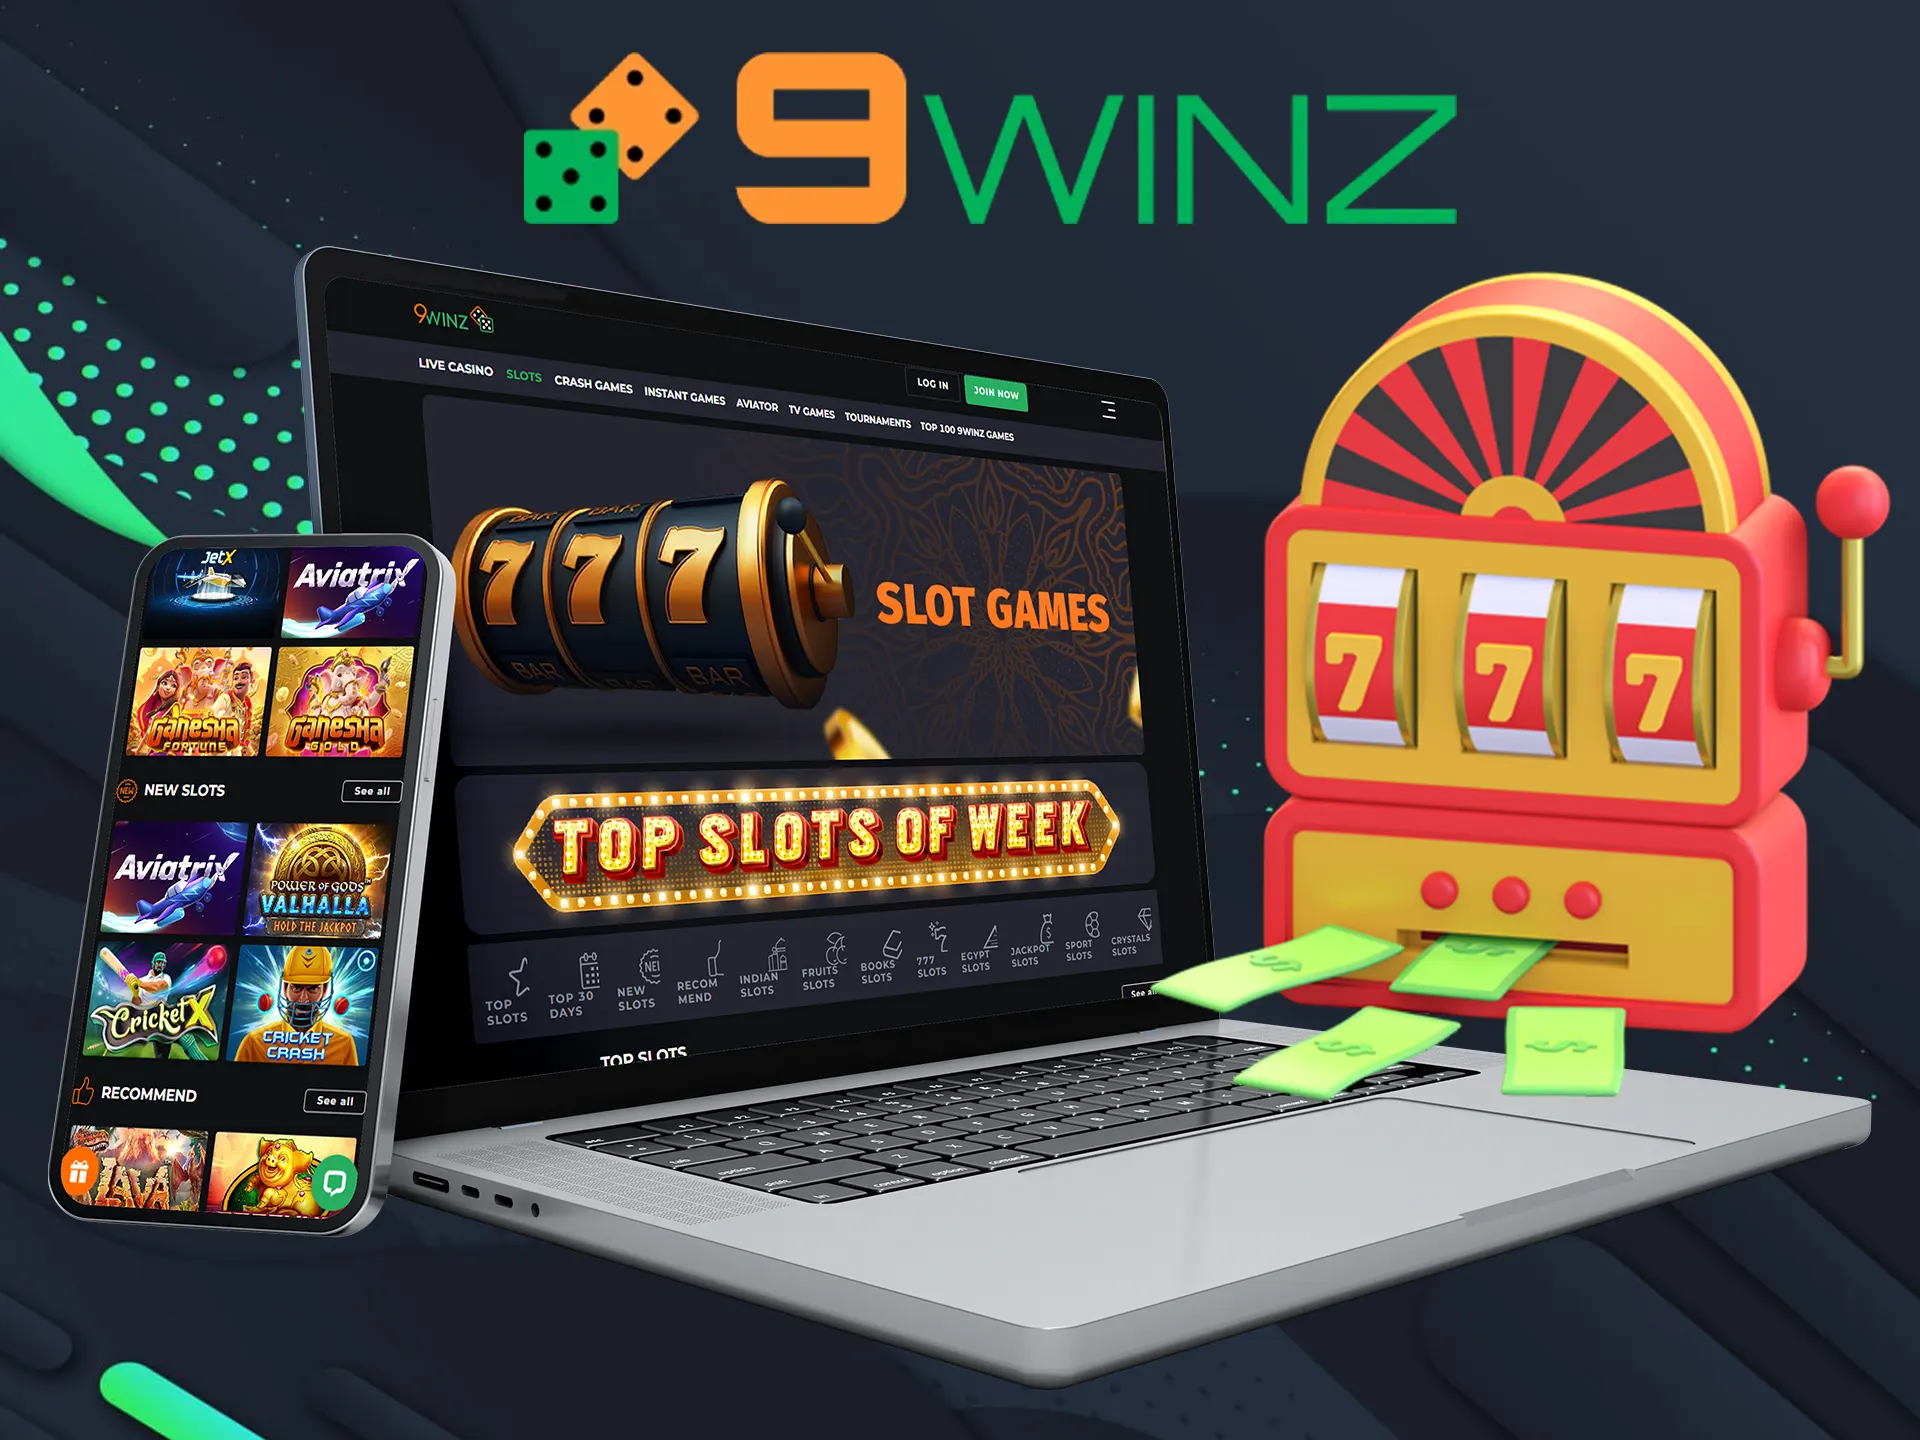 Search for your favorite type of slots at the 9winz casino.